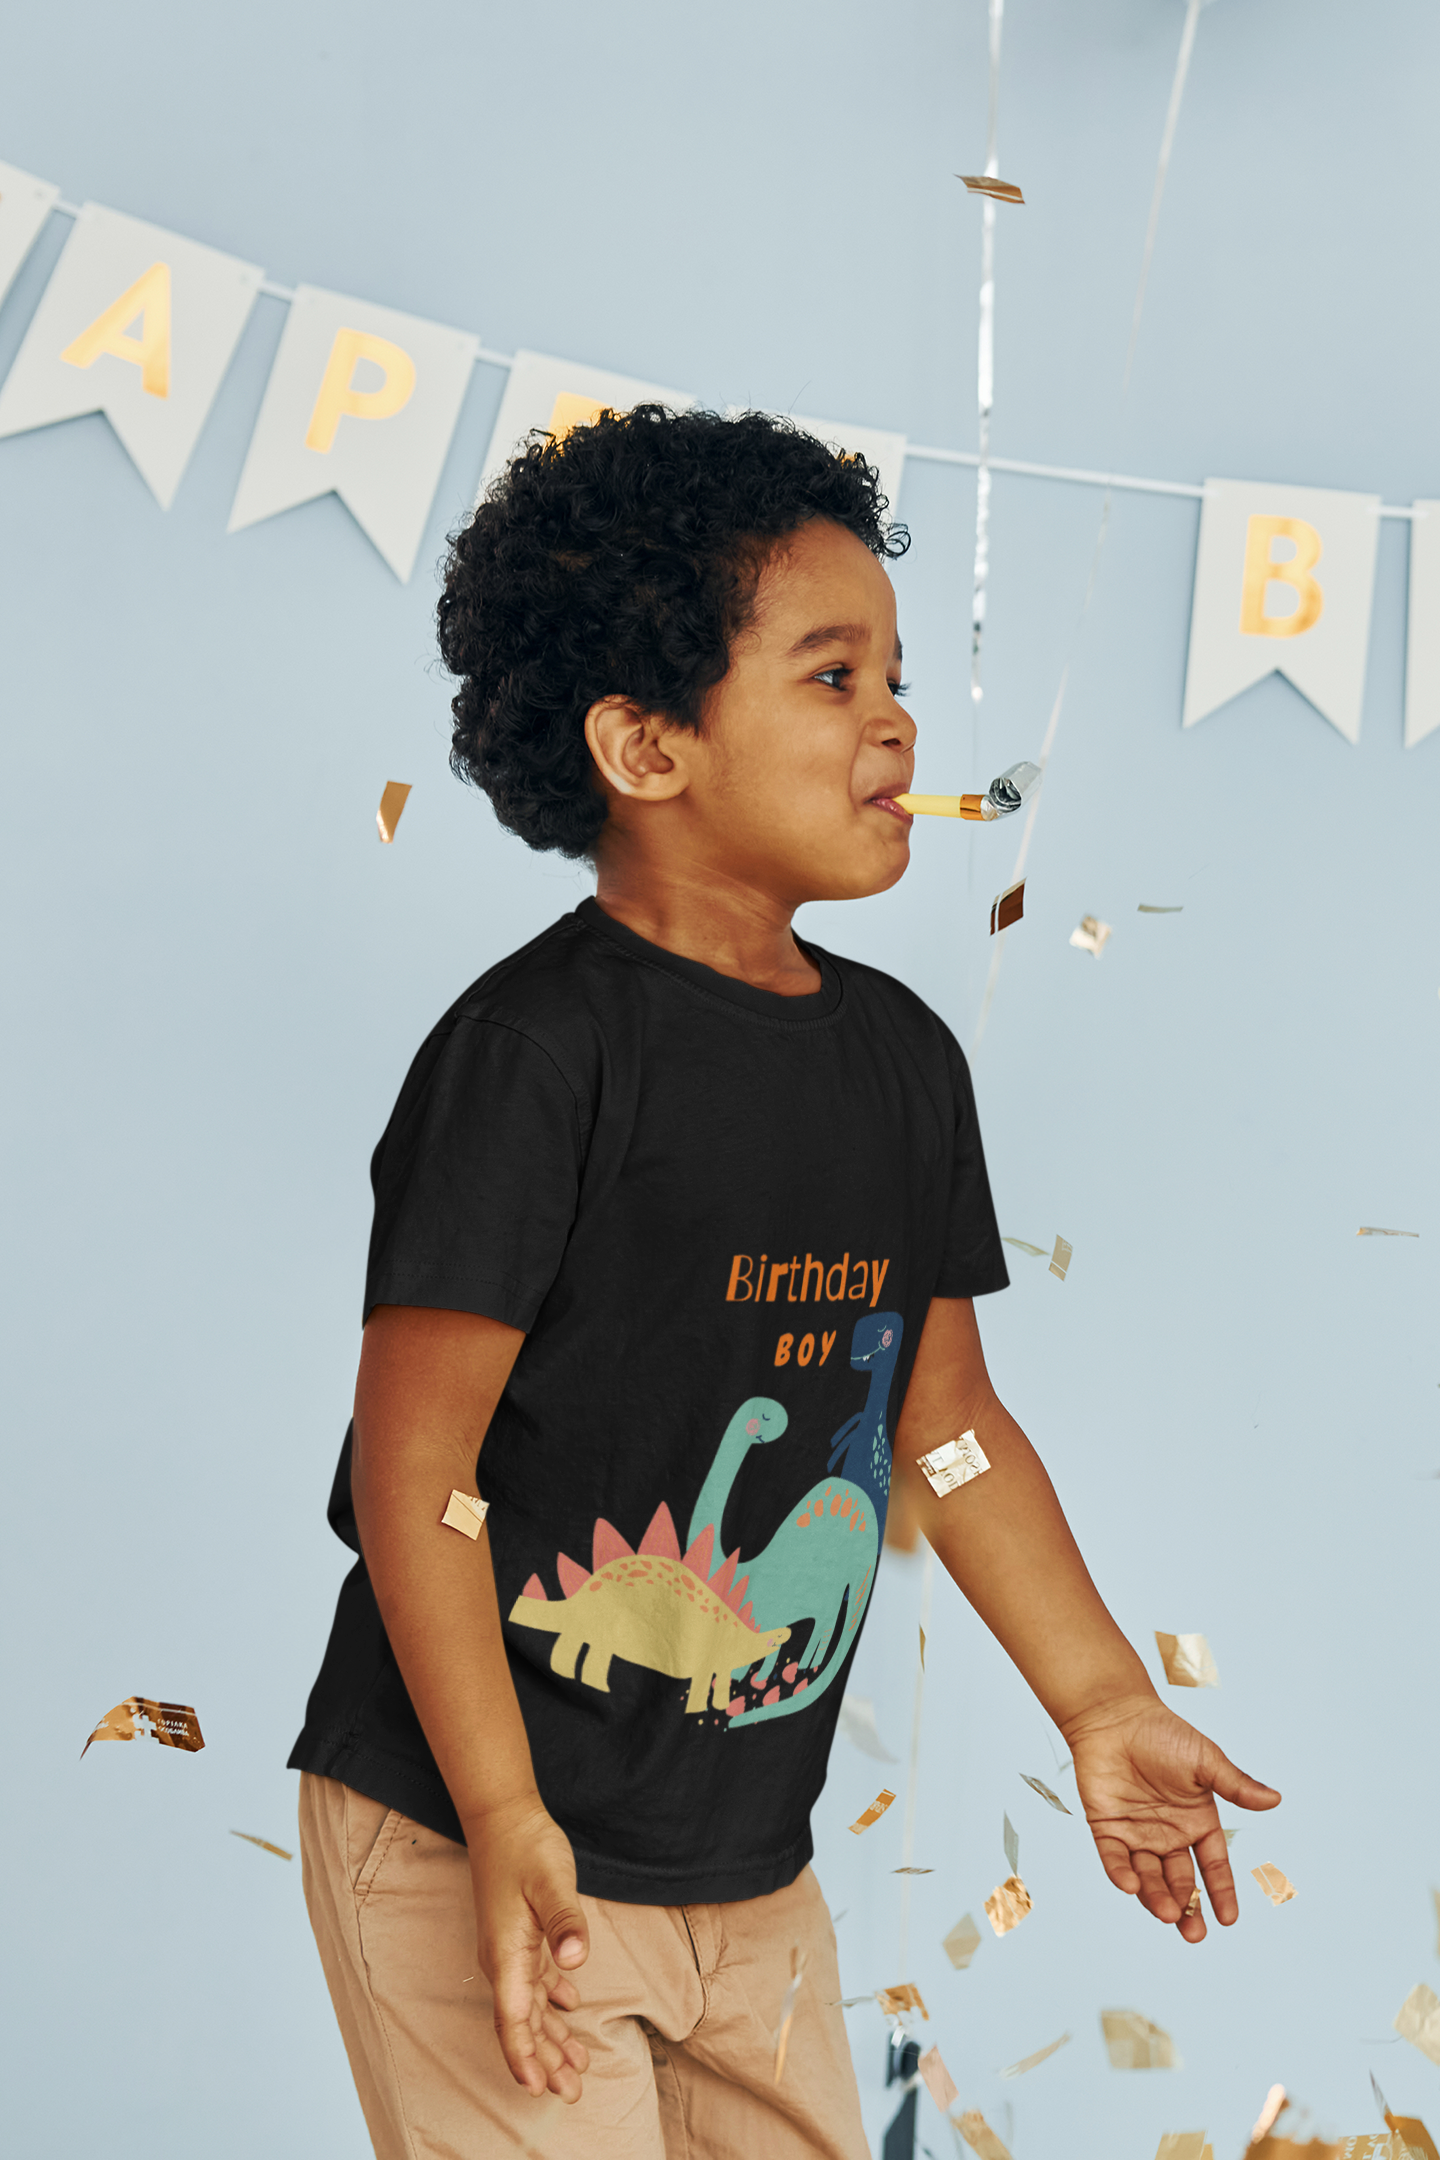 Short sleeve t-shirt with dinosaurs to celebrate a child's birthday.